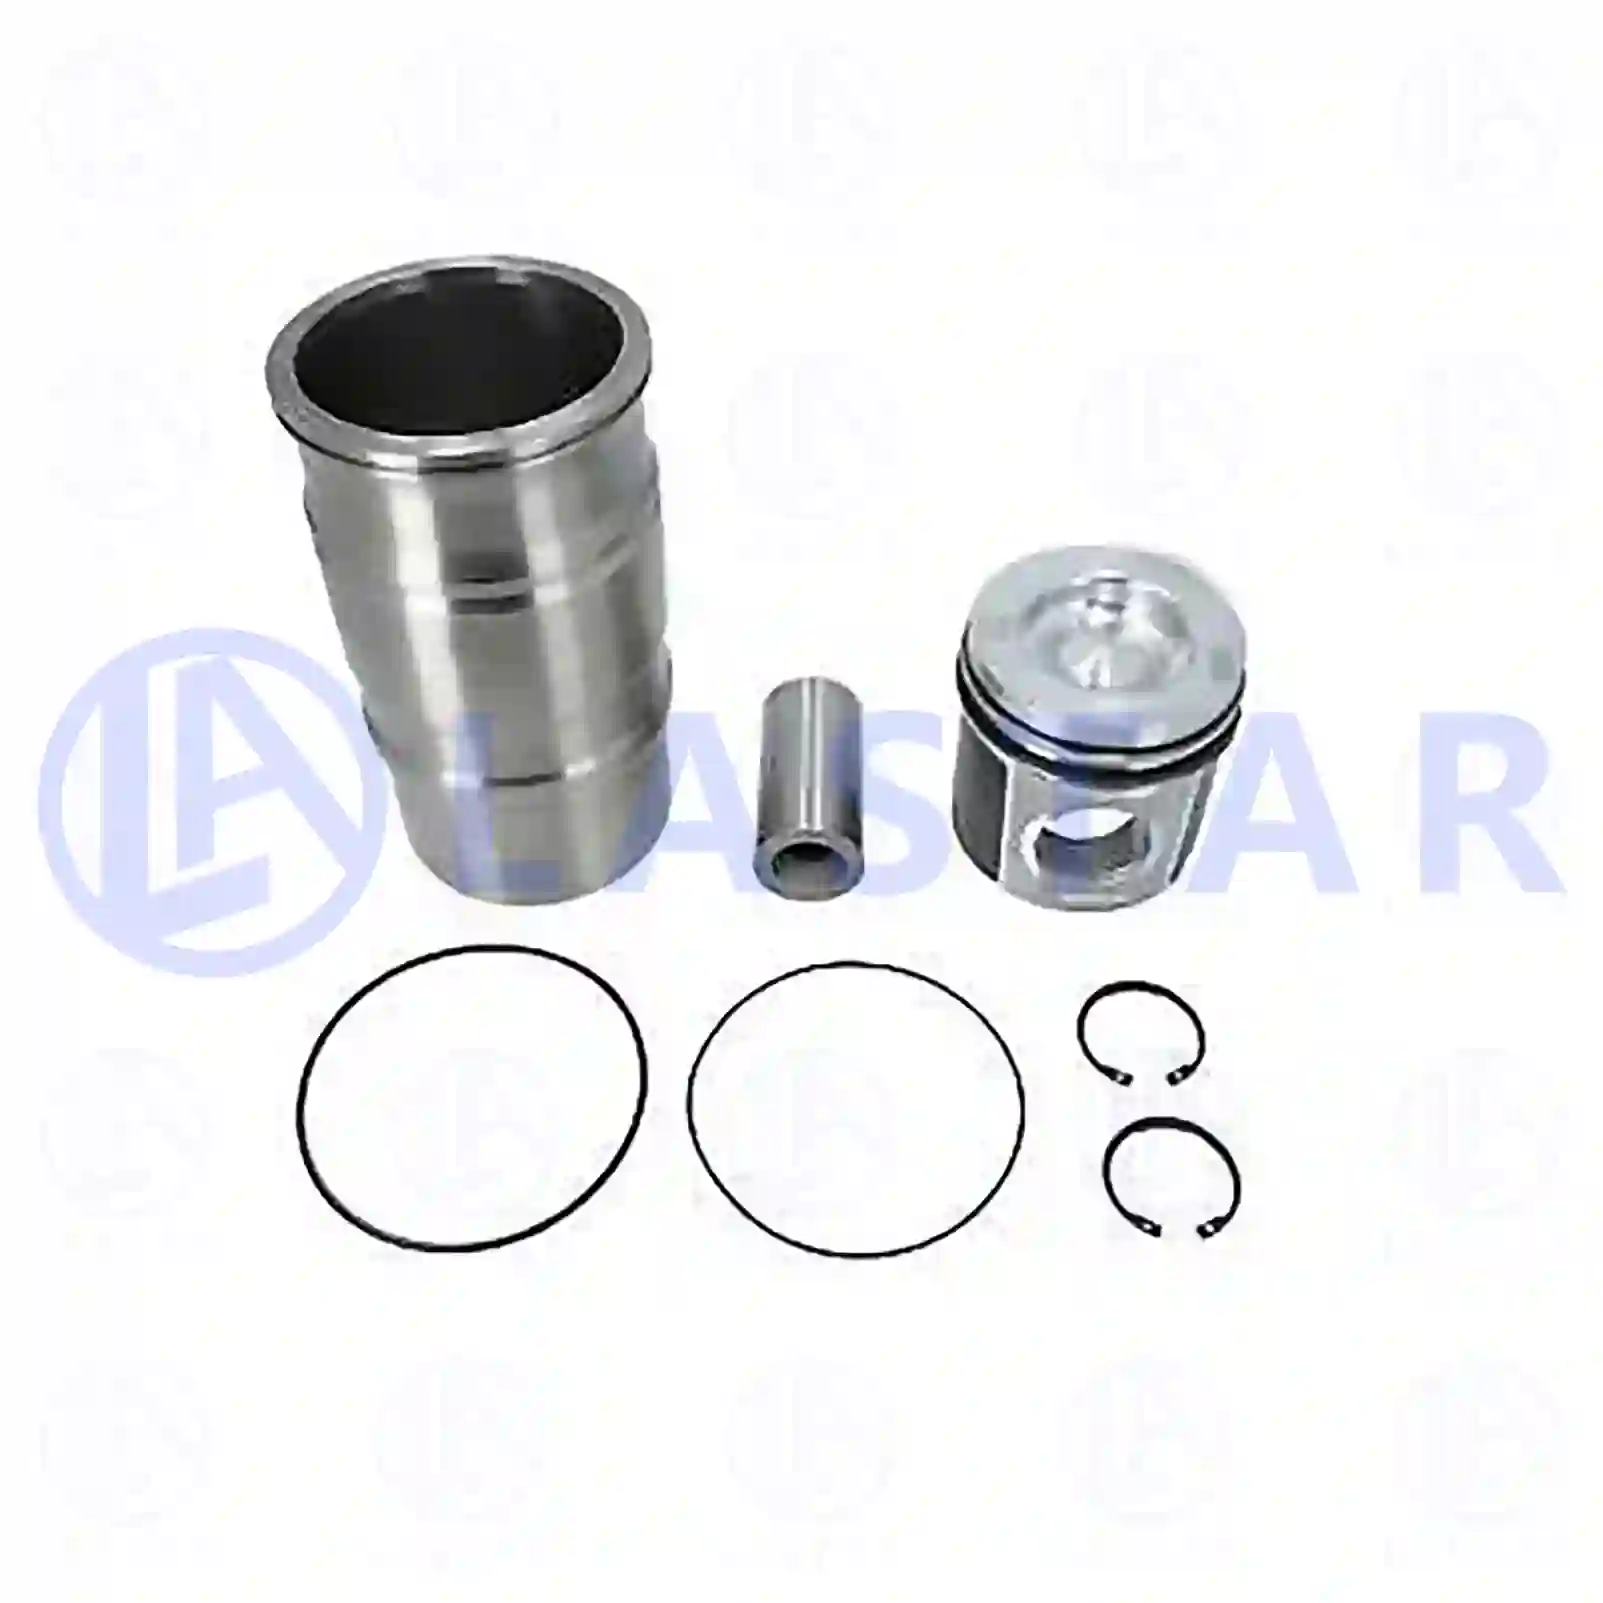 Piston with liner, 77700447, 1789041, 550298, 550299, ZG01898-0008 ||  77700447 Lastar Spare Part | Truck Spare Parts, Auotomotive Spare Parts Piston with liner, 77700447, 1789041, 550298, 550299, ZG01898-0008 ||  77700447 Lastar Spare Part | Truck Spare Parts, Auotomotive Spare Parts